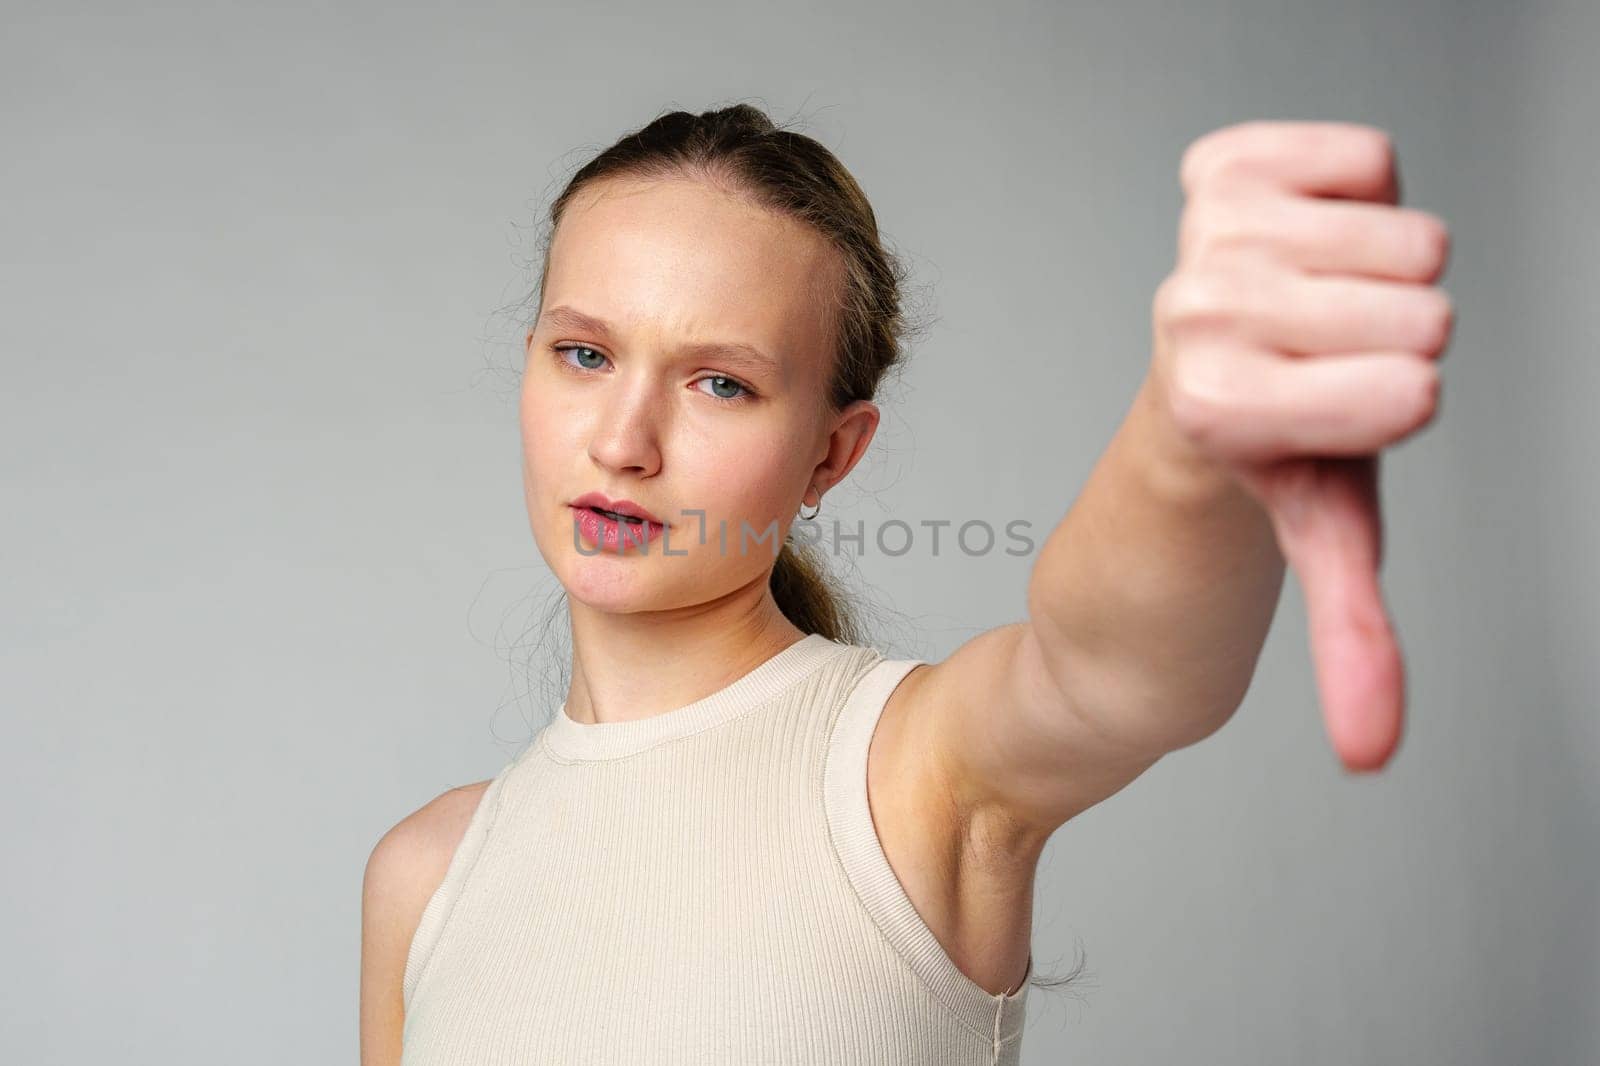 Young Woman Giving Thumbs Down Gesture Against a Neutral Background. by Fabrikasimf